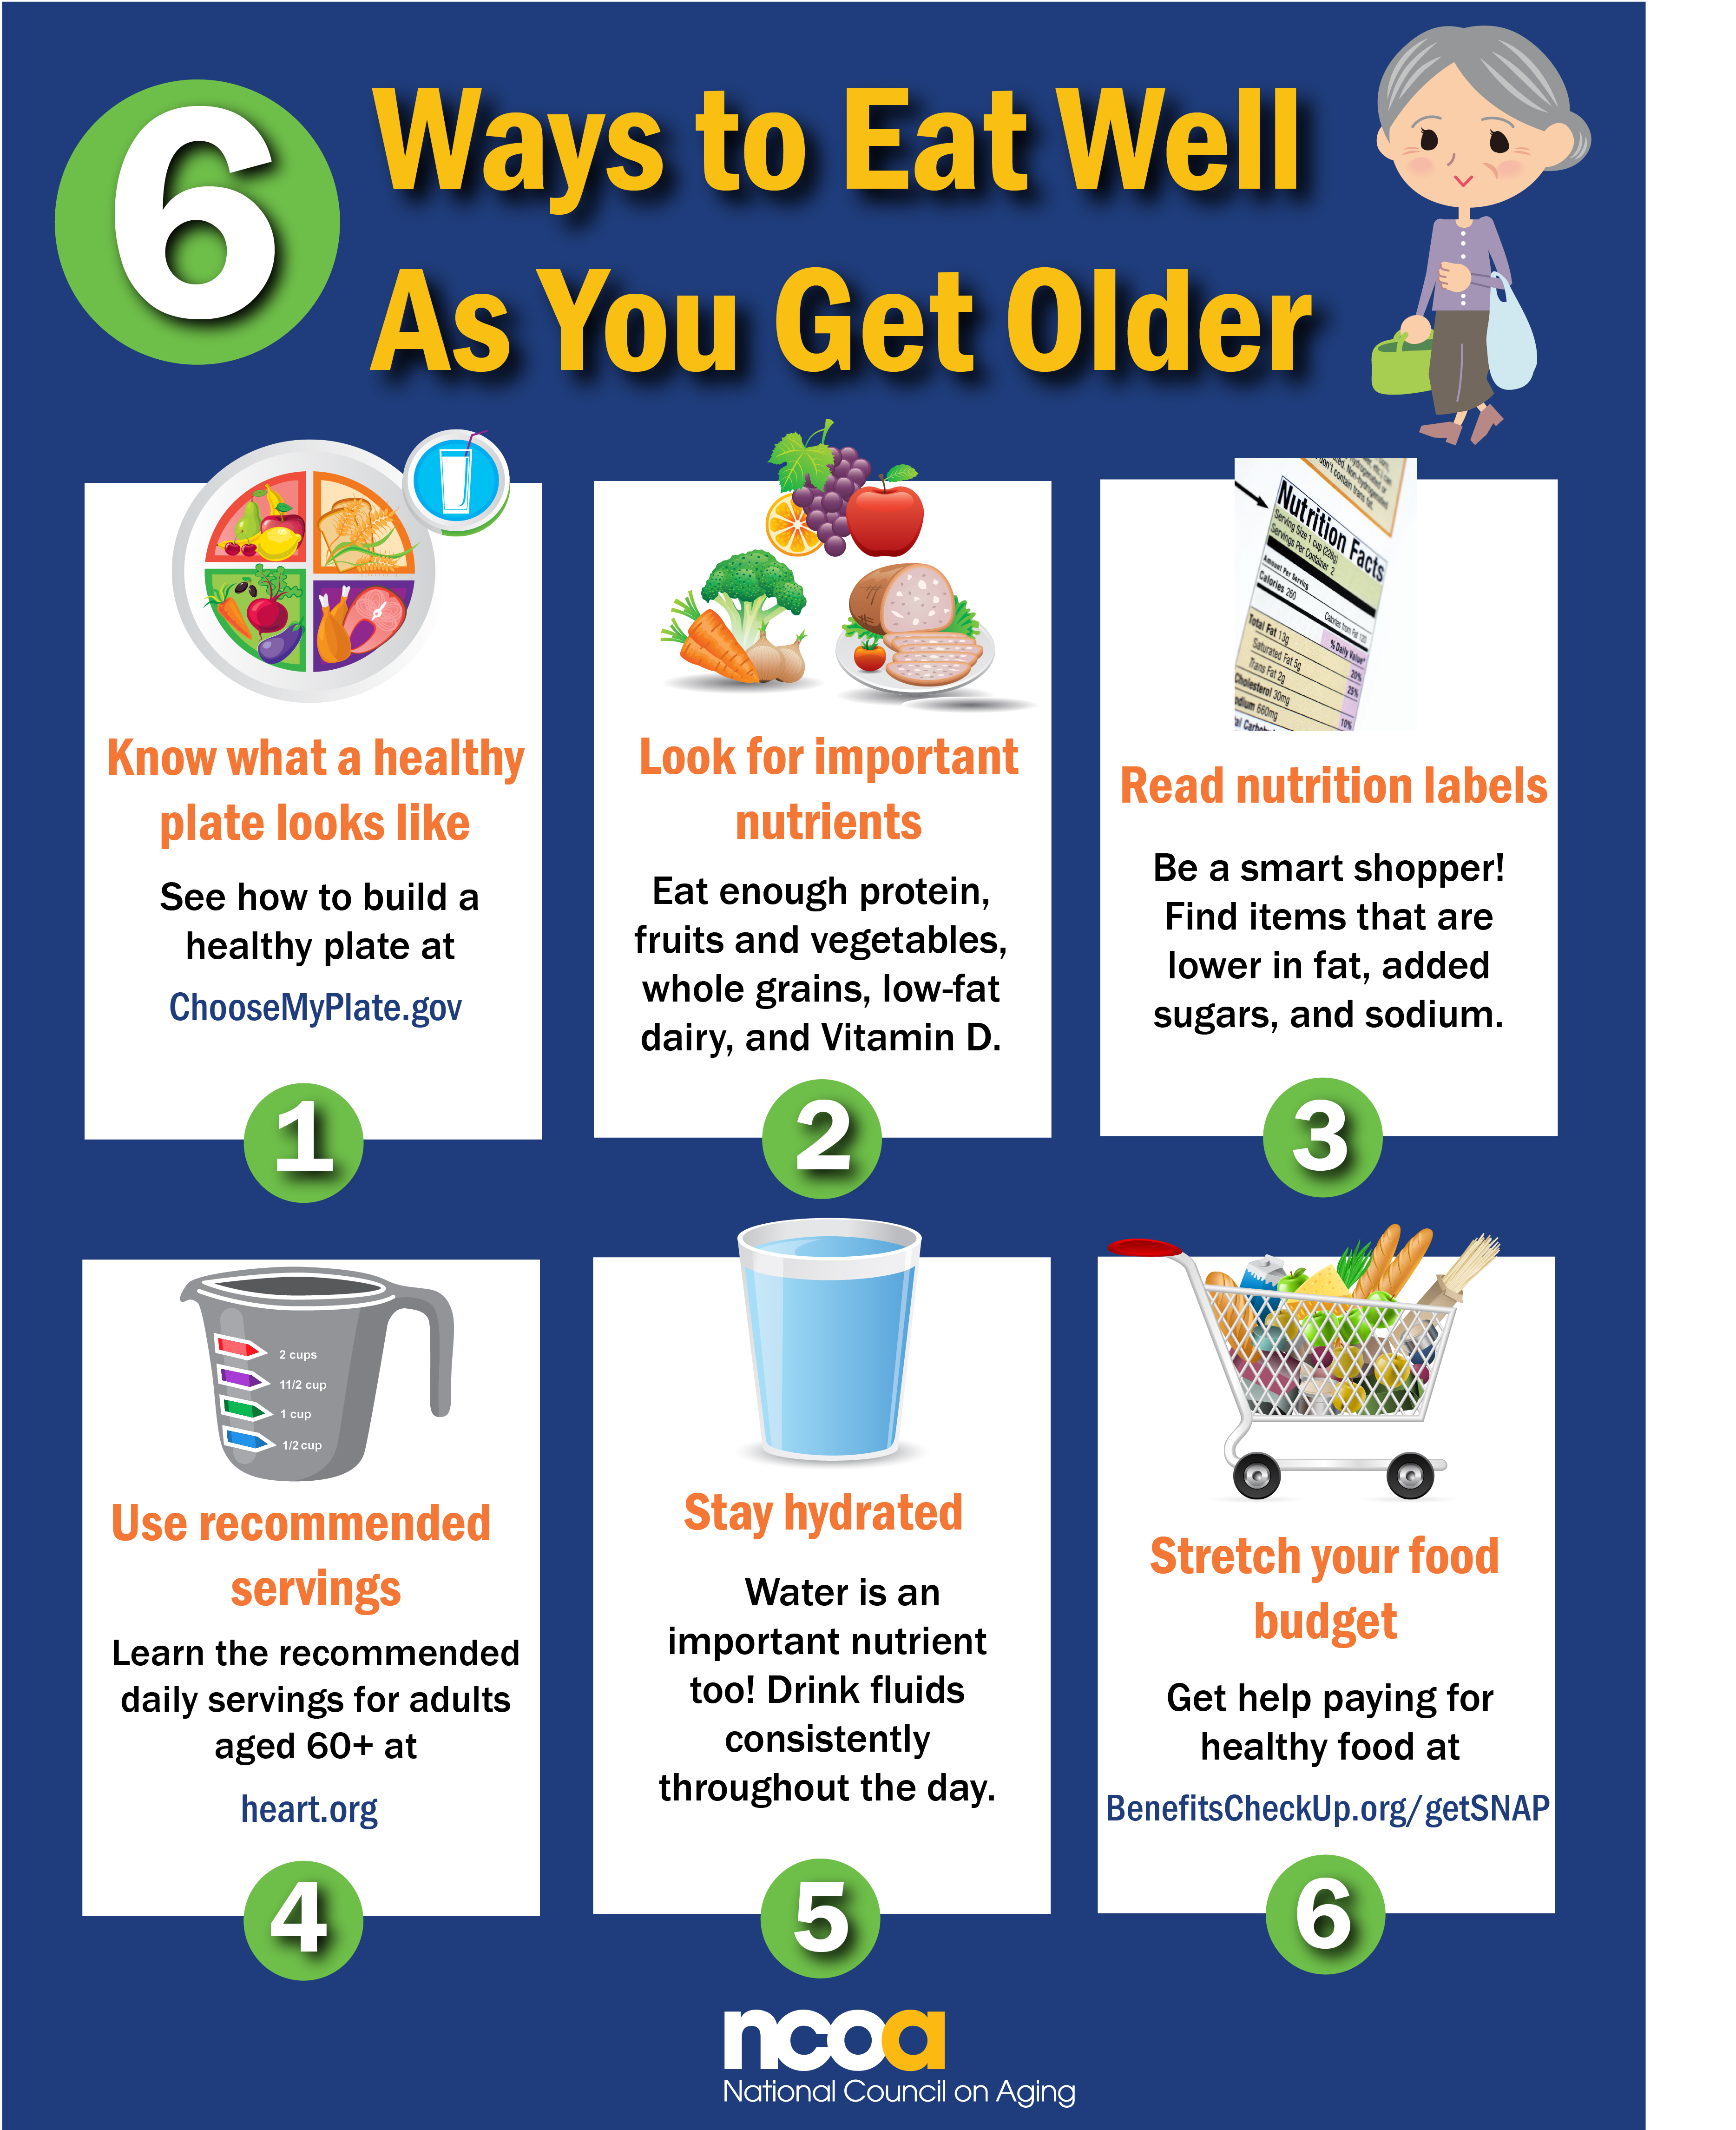 Infographic showing the 6 ways to eat well as you get older. The tips incude: Know what a healthy plate looks like and look for important nutrients. Read nutrition labels and use recommended servings. Stay hydrated. Learn ways to stretch your food budget.